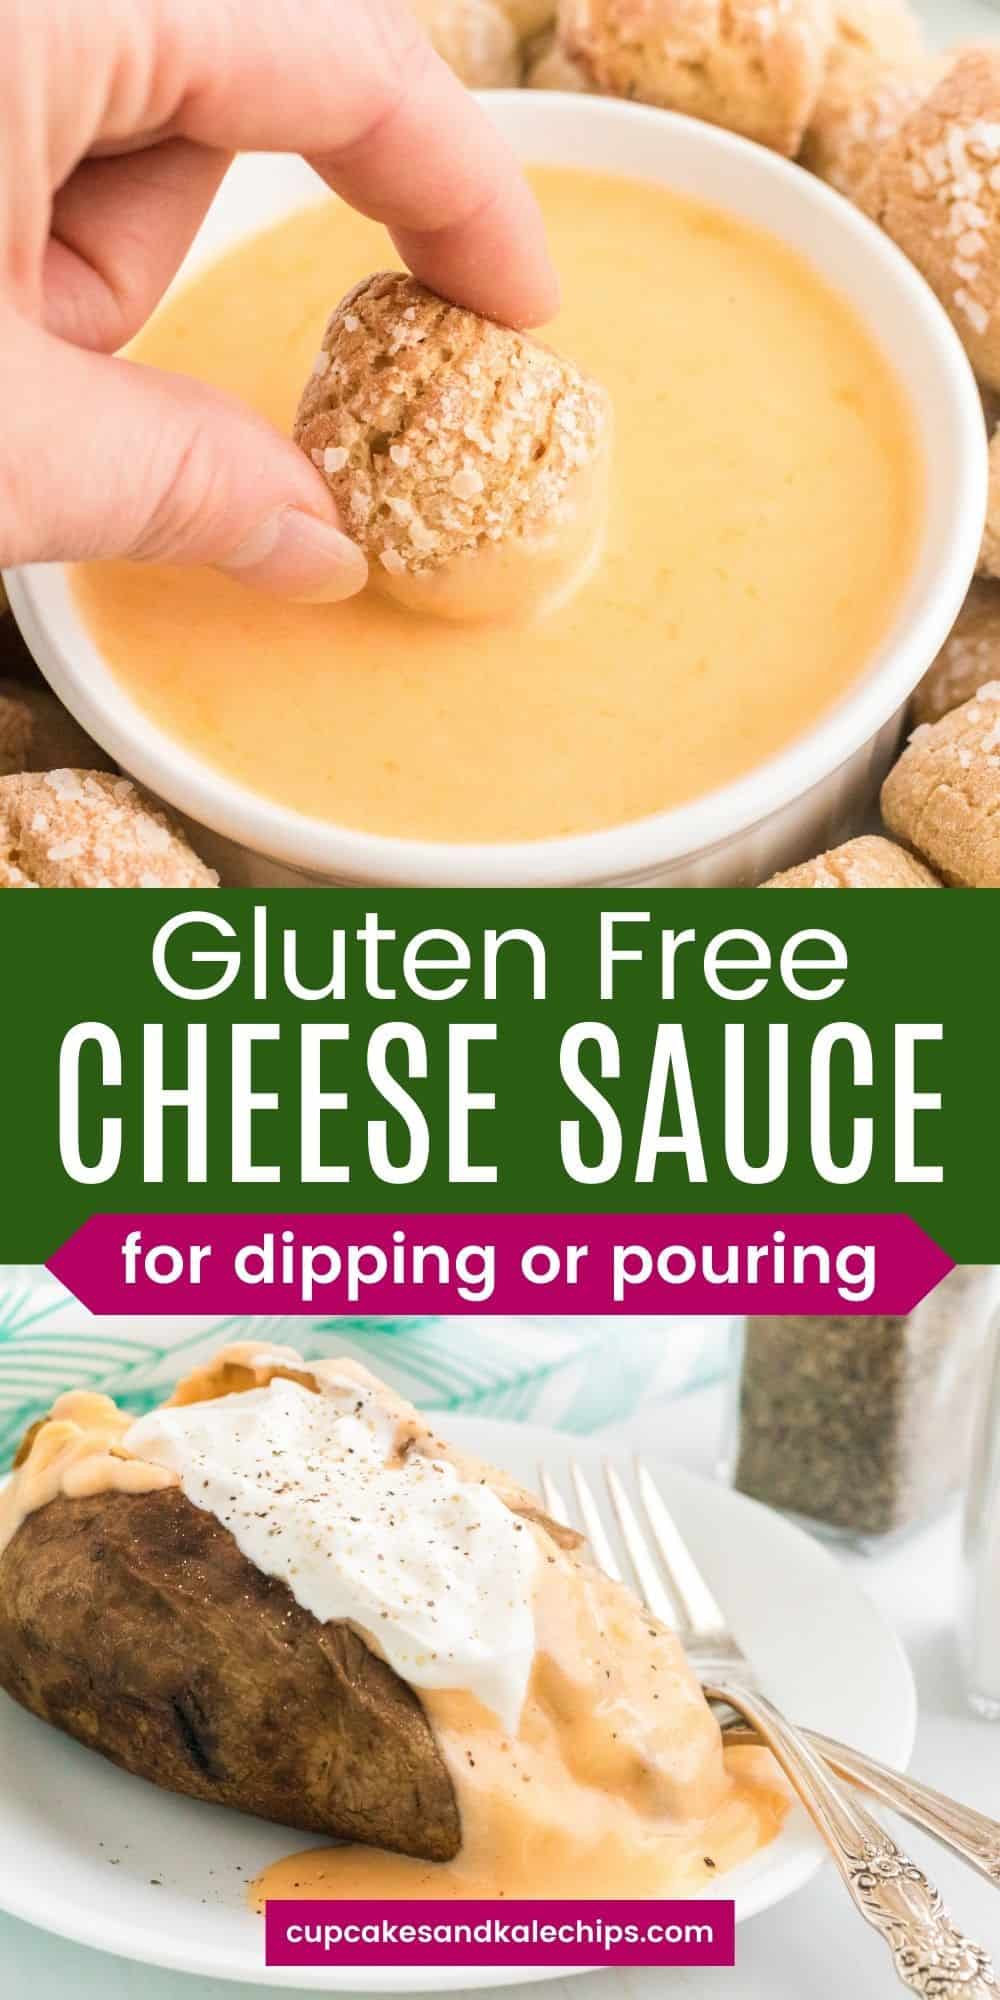 Easy Gluten Free Cheese Sauce | Cupcakes & Kale Chips